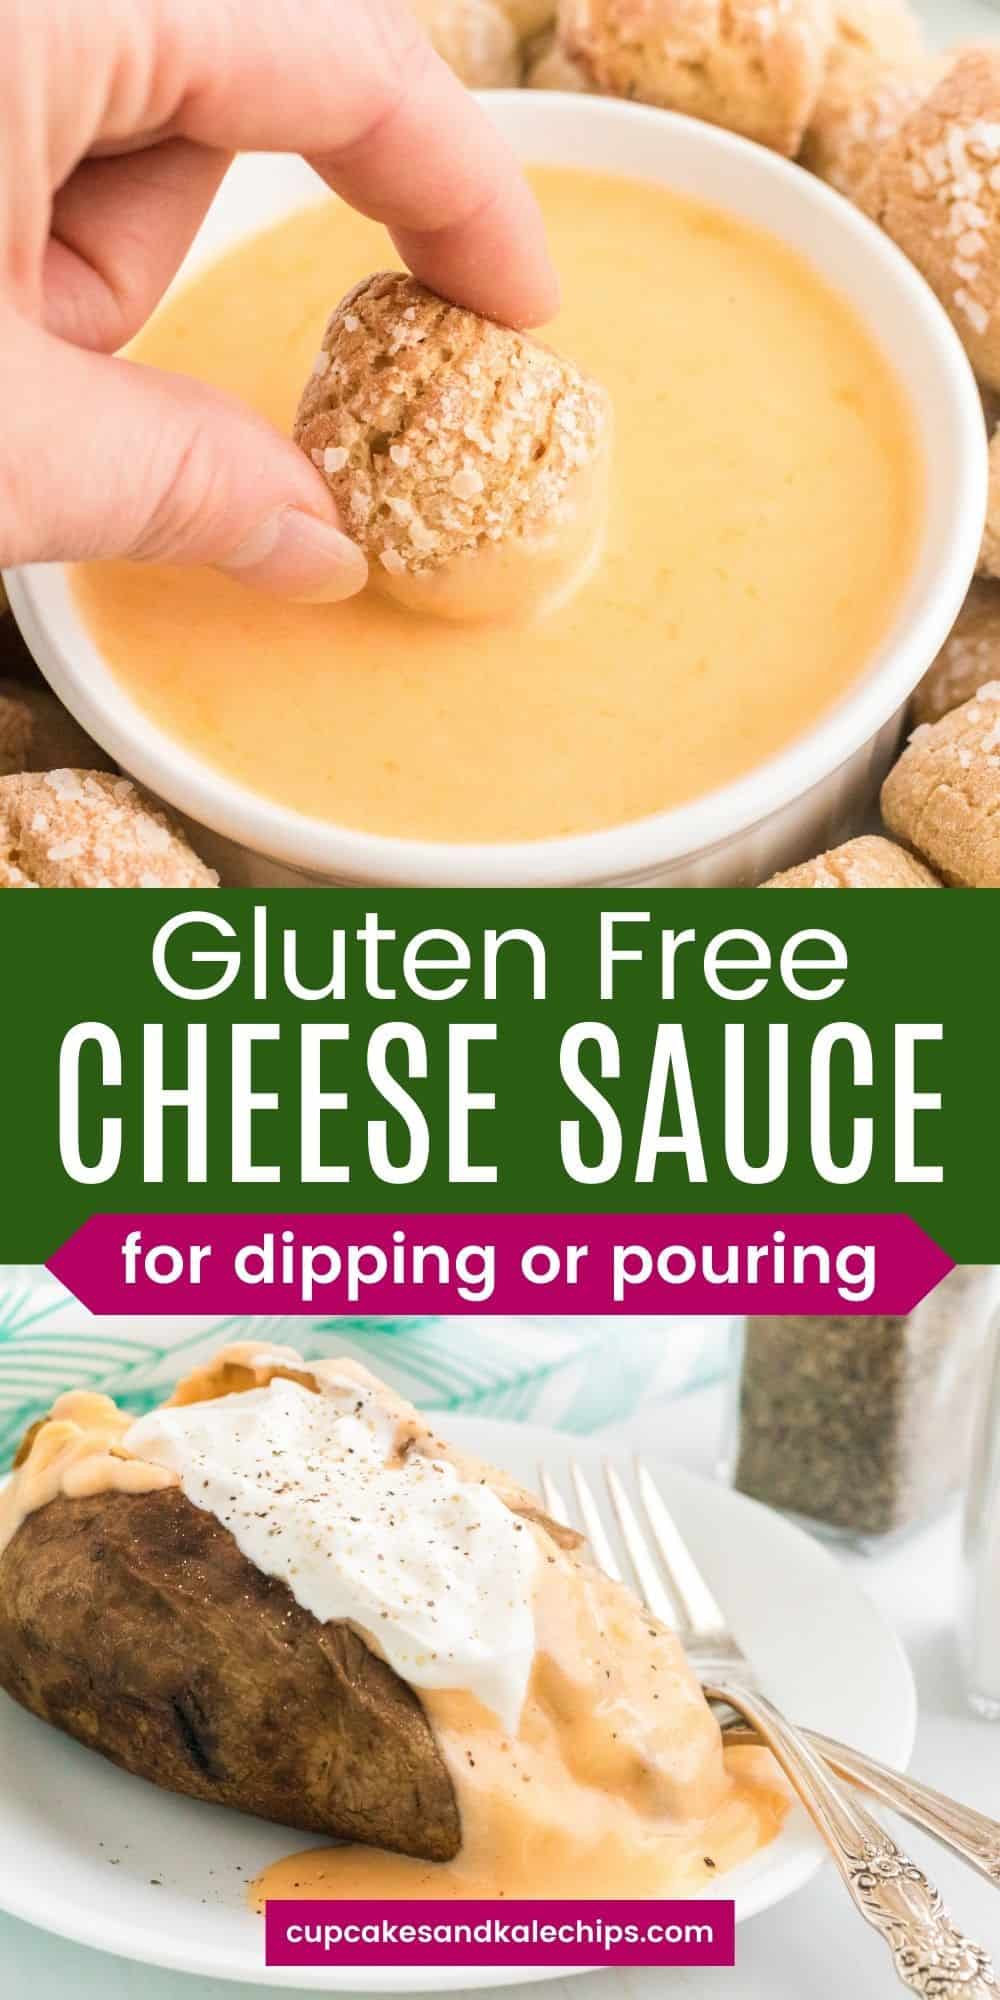 Easy Gluten Free Cheese Sauce | Cupcakes & Kale Chips